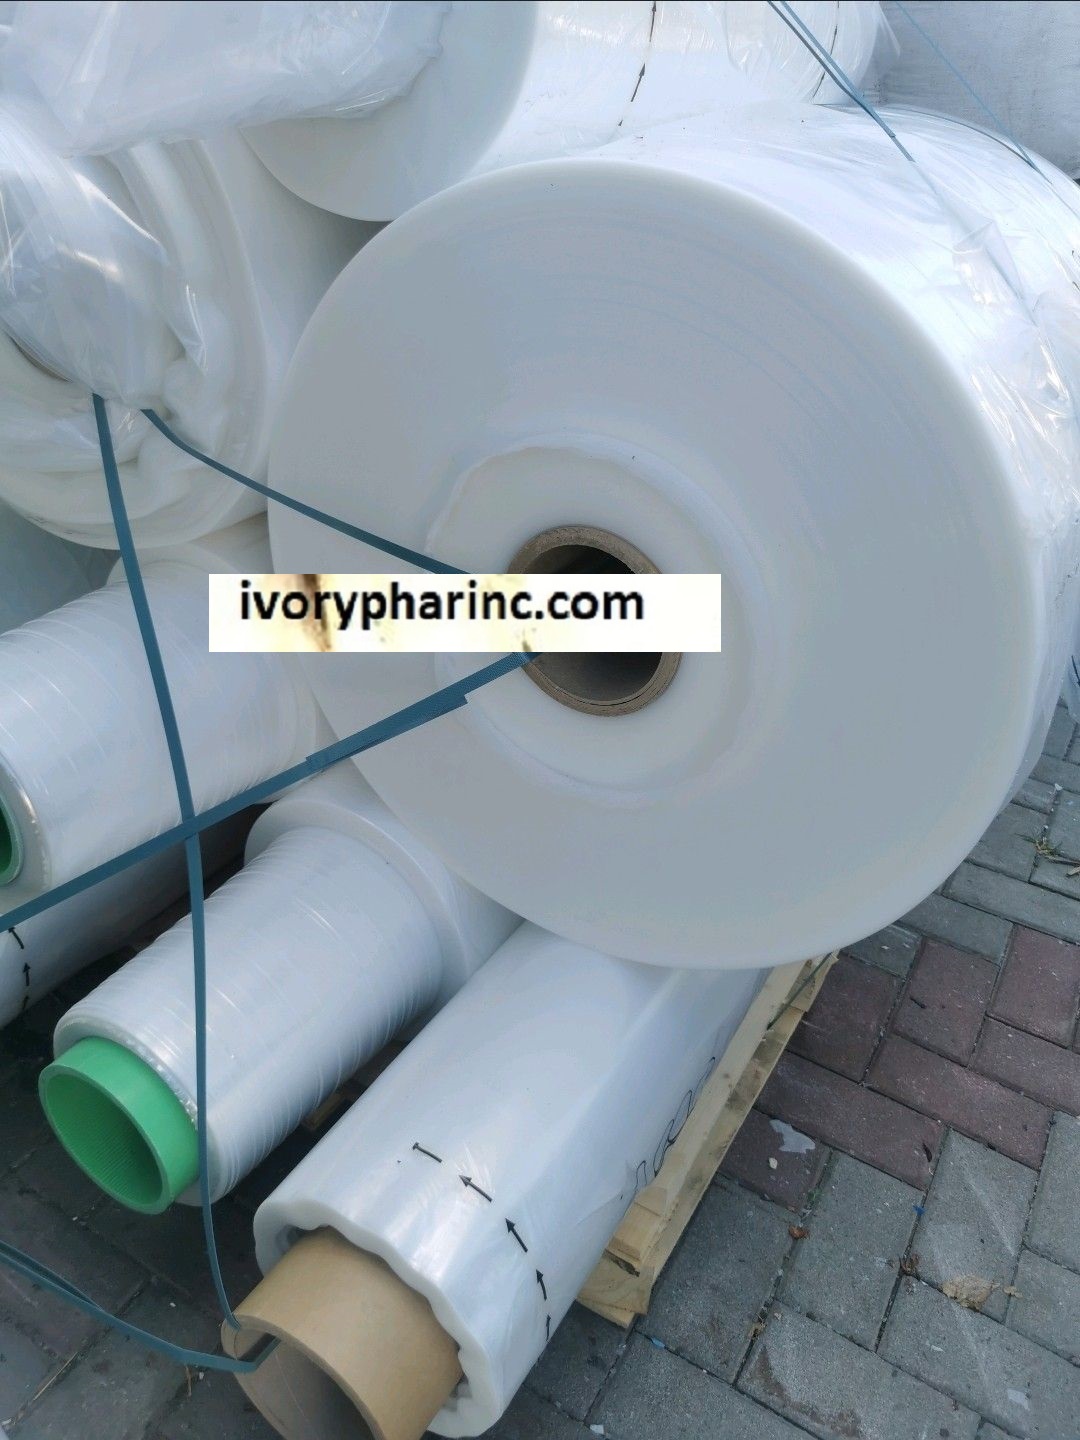 Ongoing For Sale LDPE Plastic Scrap, LDPE roll, Bale, Lumps